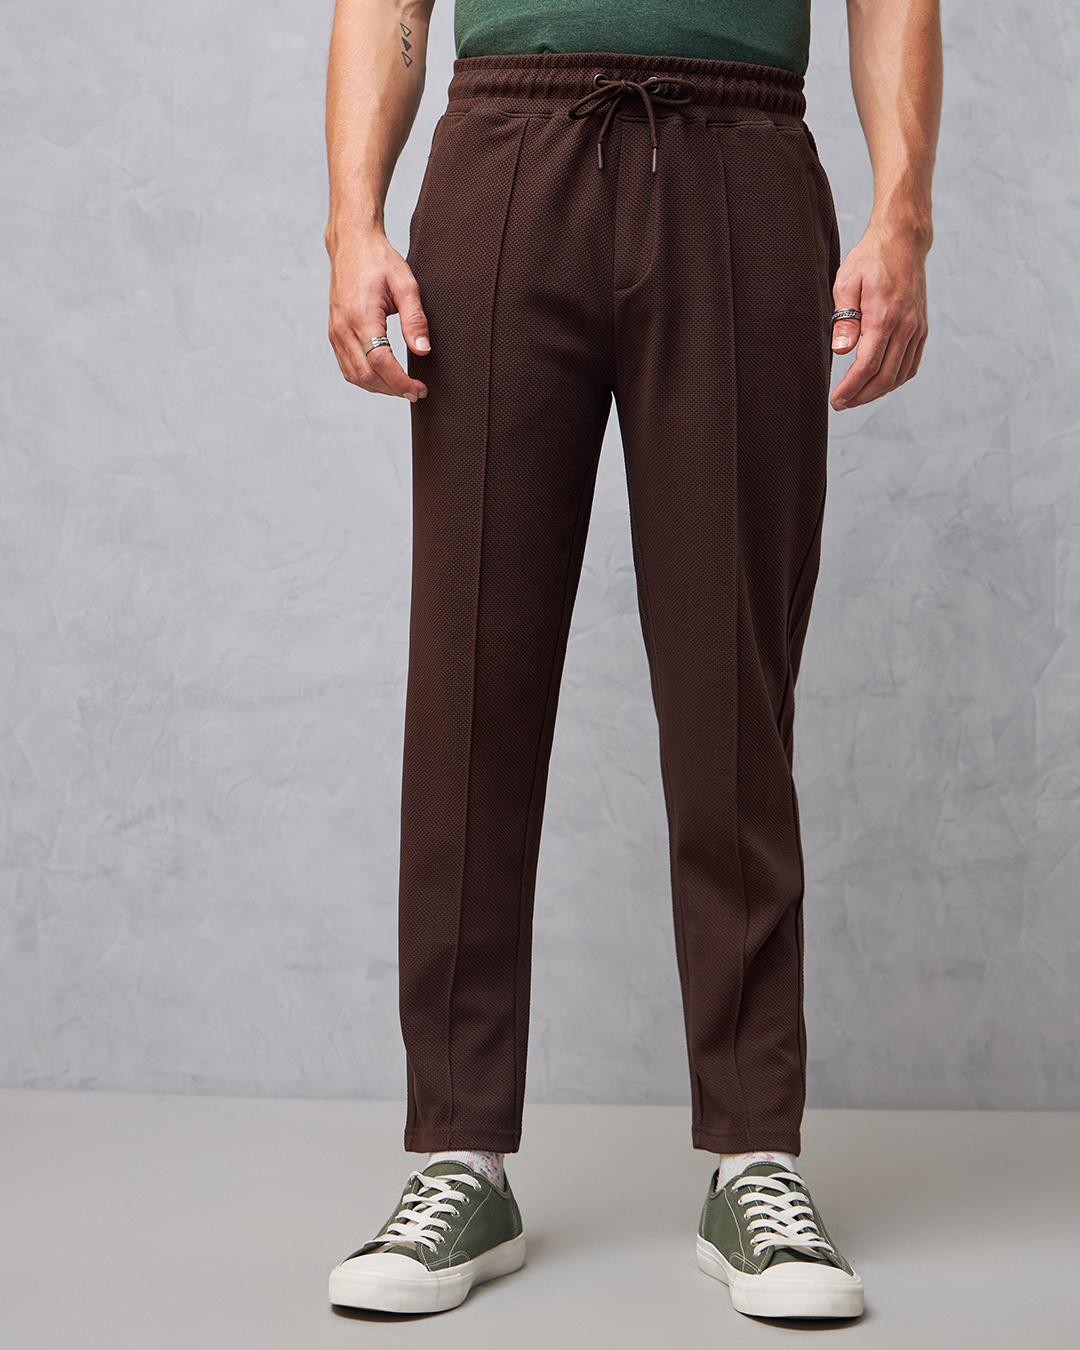 Men's Brown Pants | Explore our New Arrivals | ZARA United States